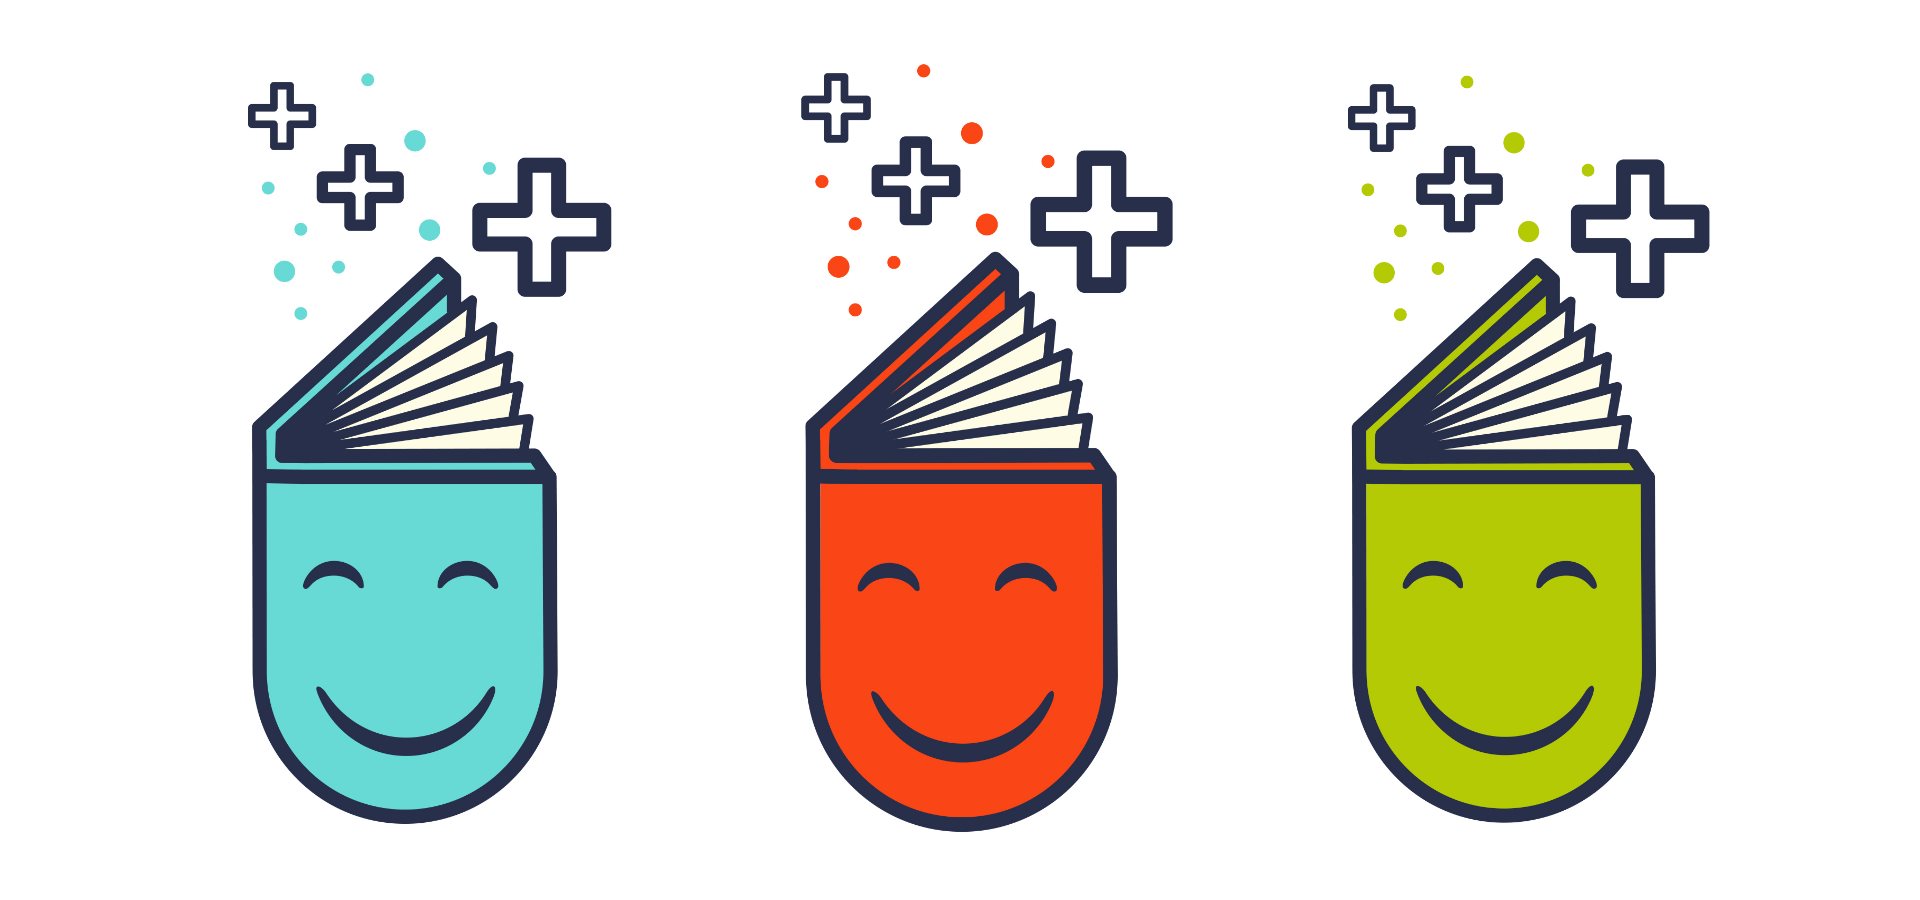 A blue, green and red open book graphic with a smiley face on them